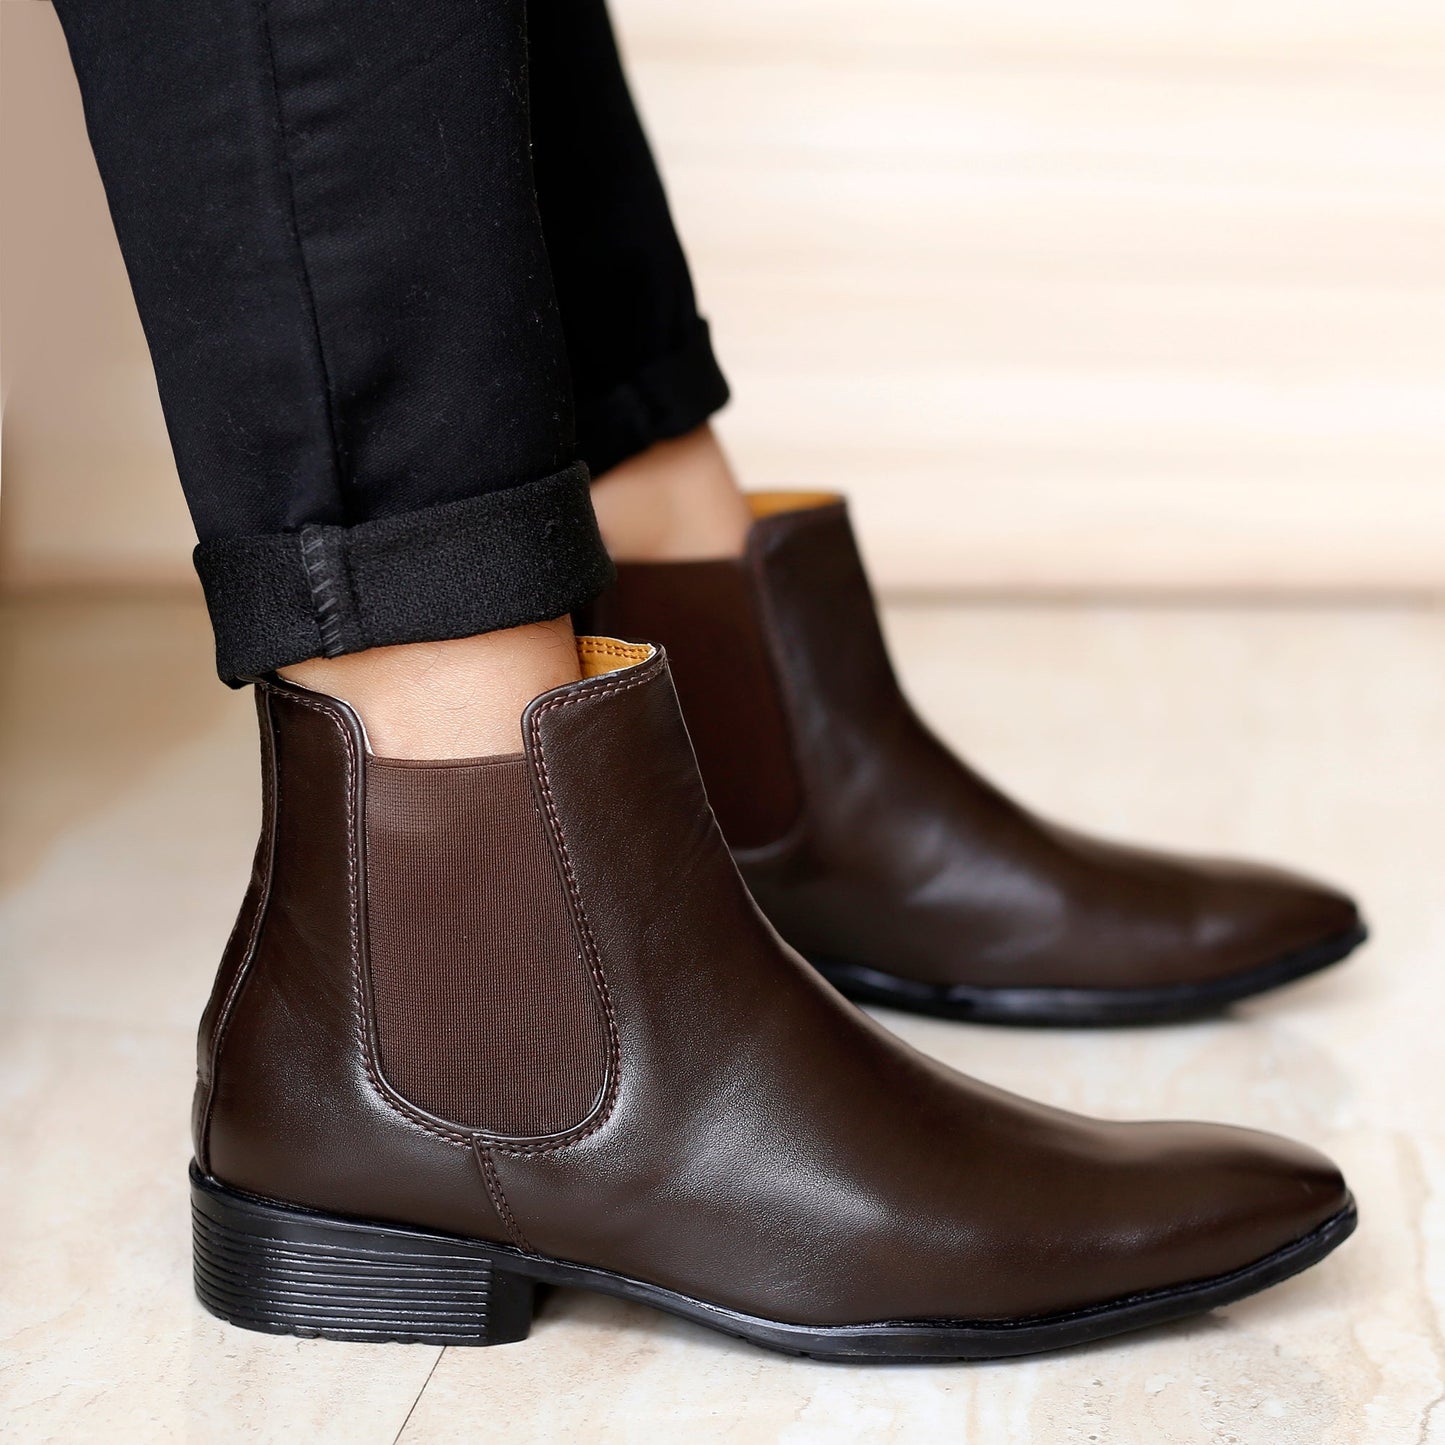 Buy New Stylish Chelsea Boot Brown For Men -JackMarc